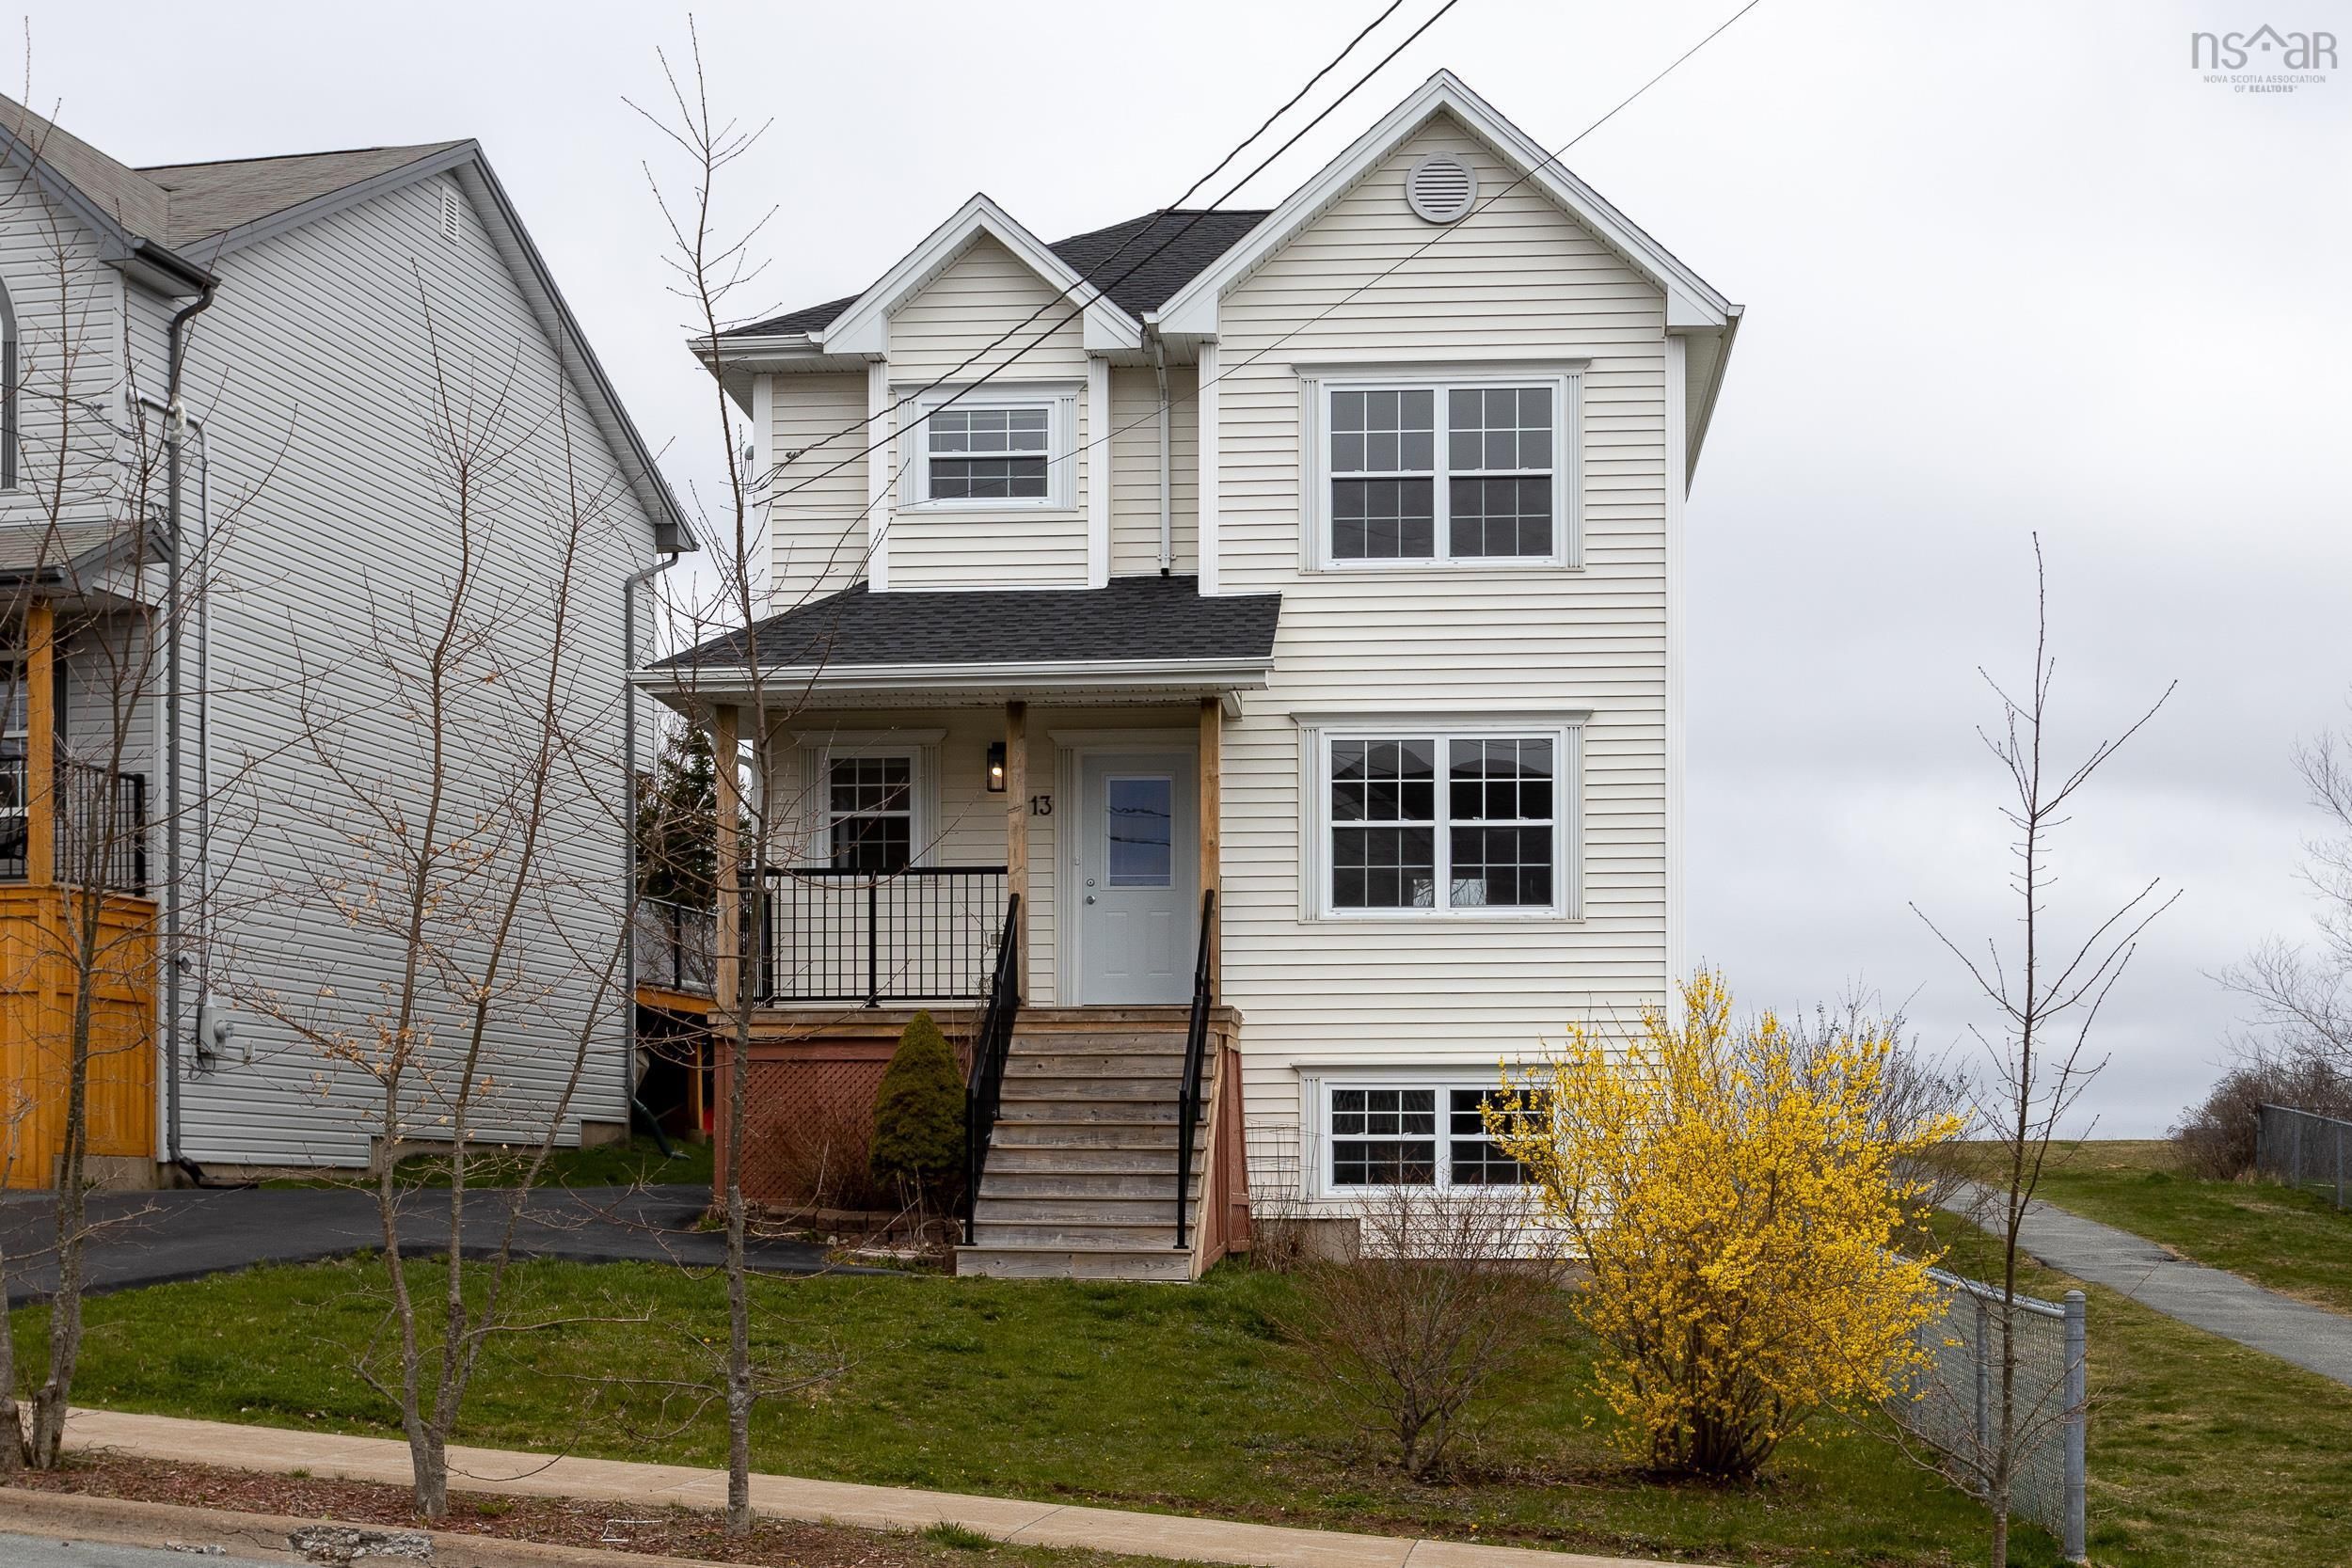 New property listed in 40-Timberlea, Prospect, St. Marg, Halifax-Dartmouth